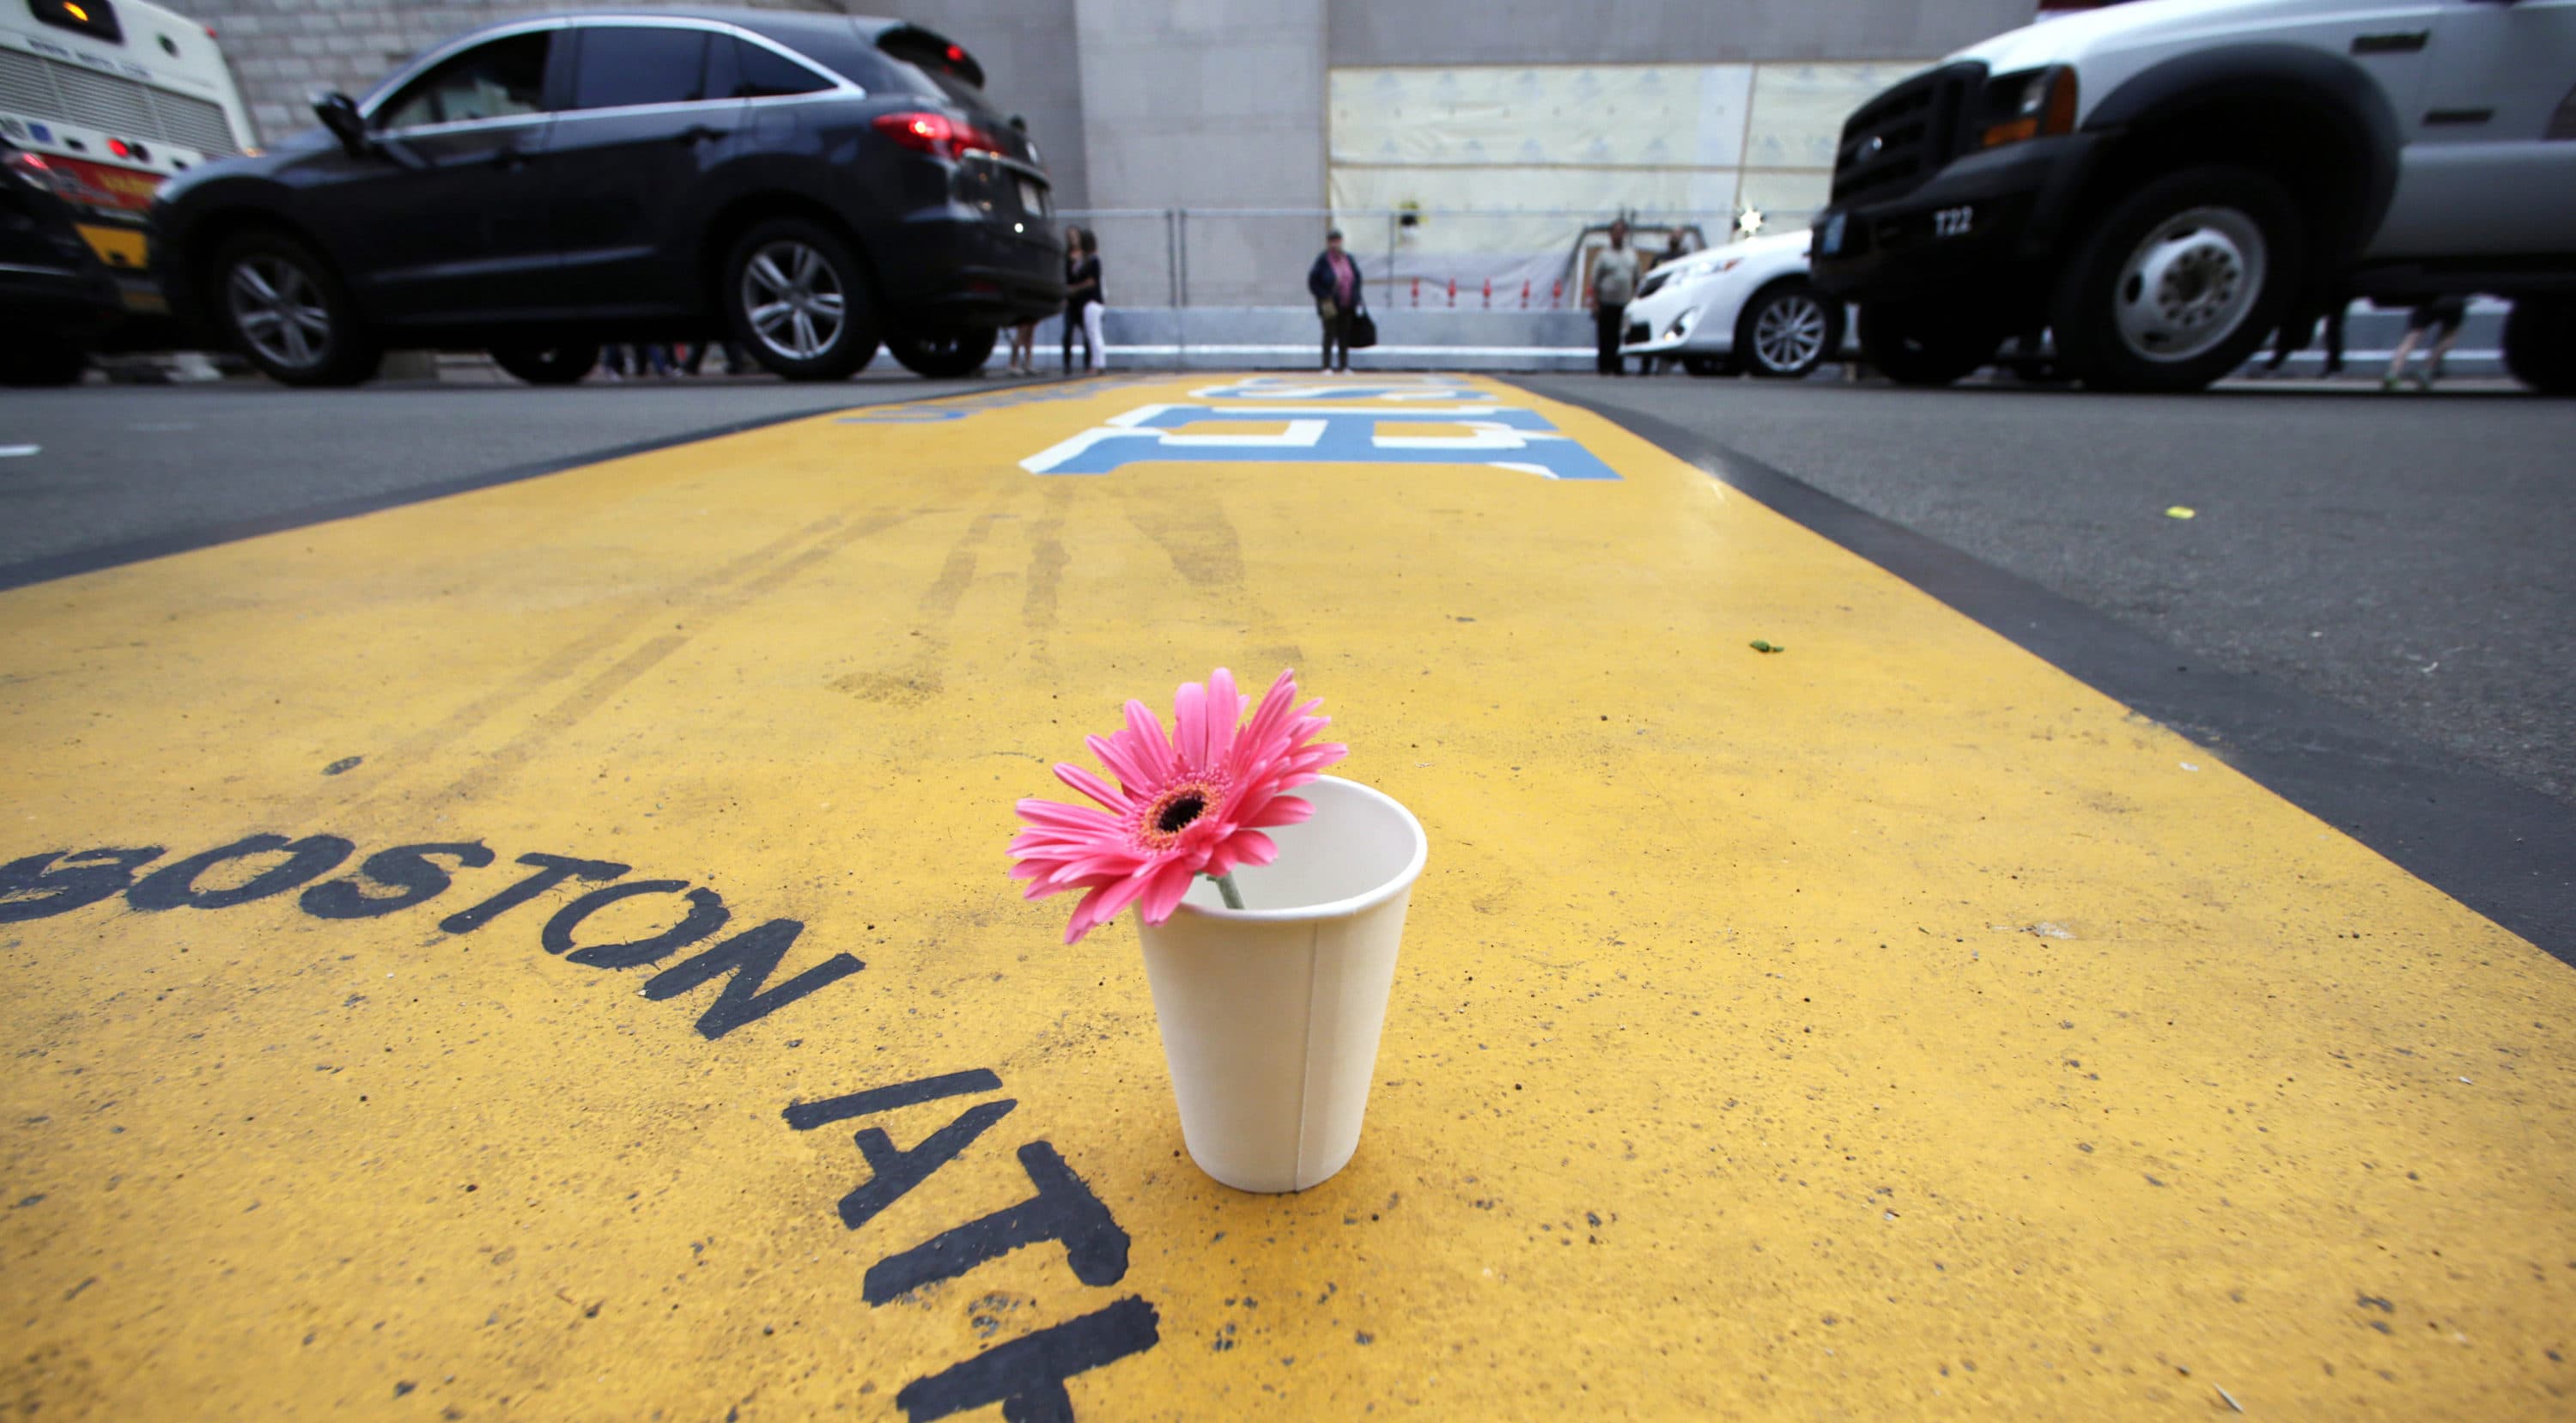 A single flower rested in a paper cup on the finish line of the Boston Marathon after a federal jury ruled that Tsarnaev should be sentenced to death for his role in the 2013 attack. (Charles Krupa/AP)